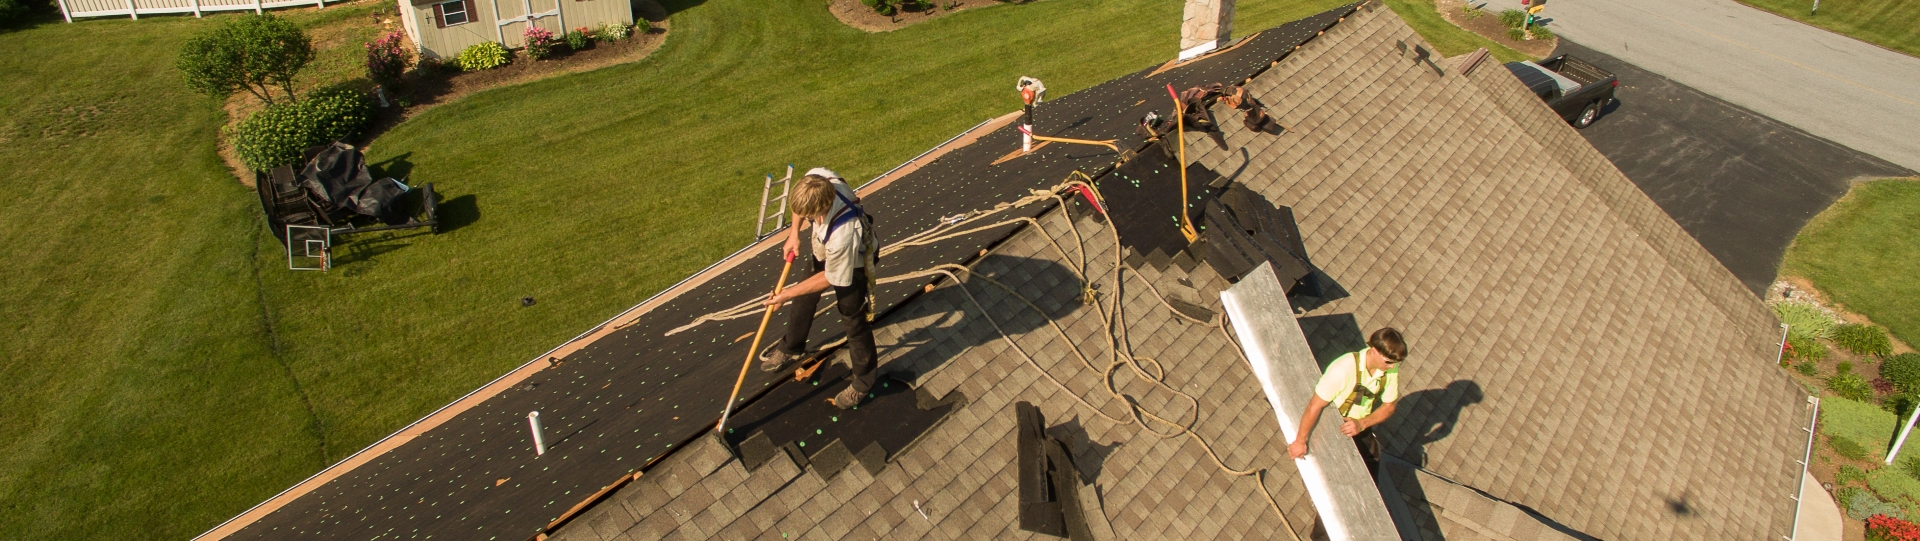 Close up, overhead view of the Middle Creek Roofing Crew working on a roof.